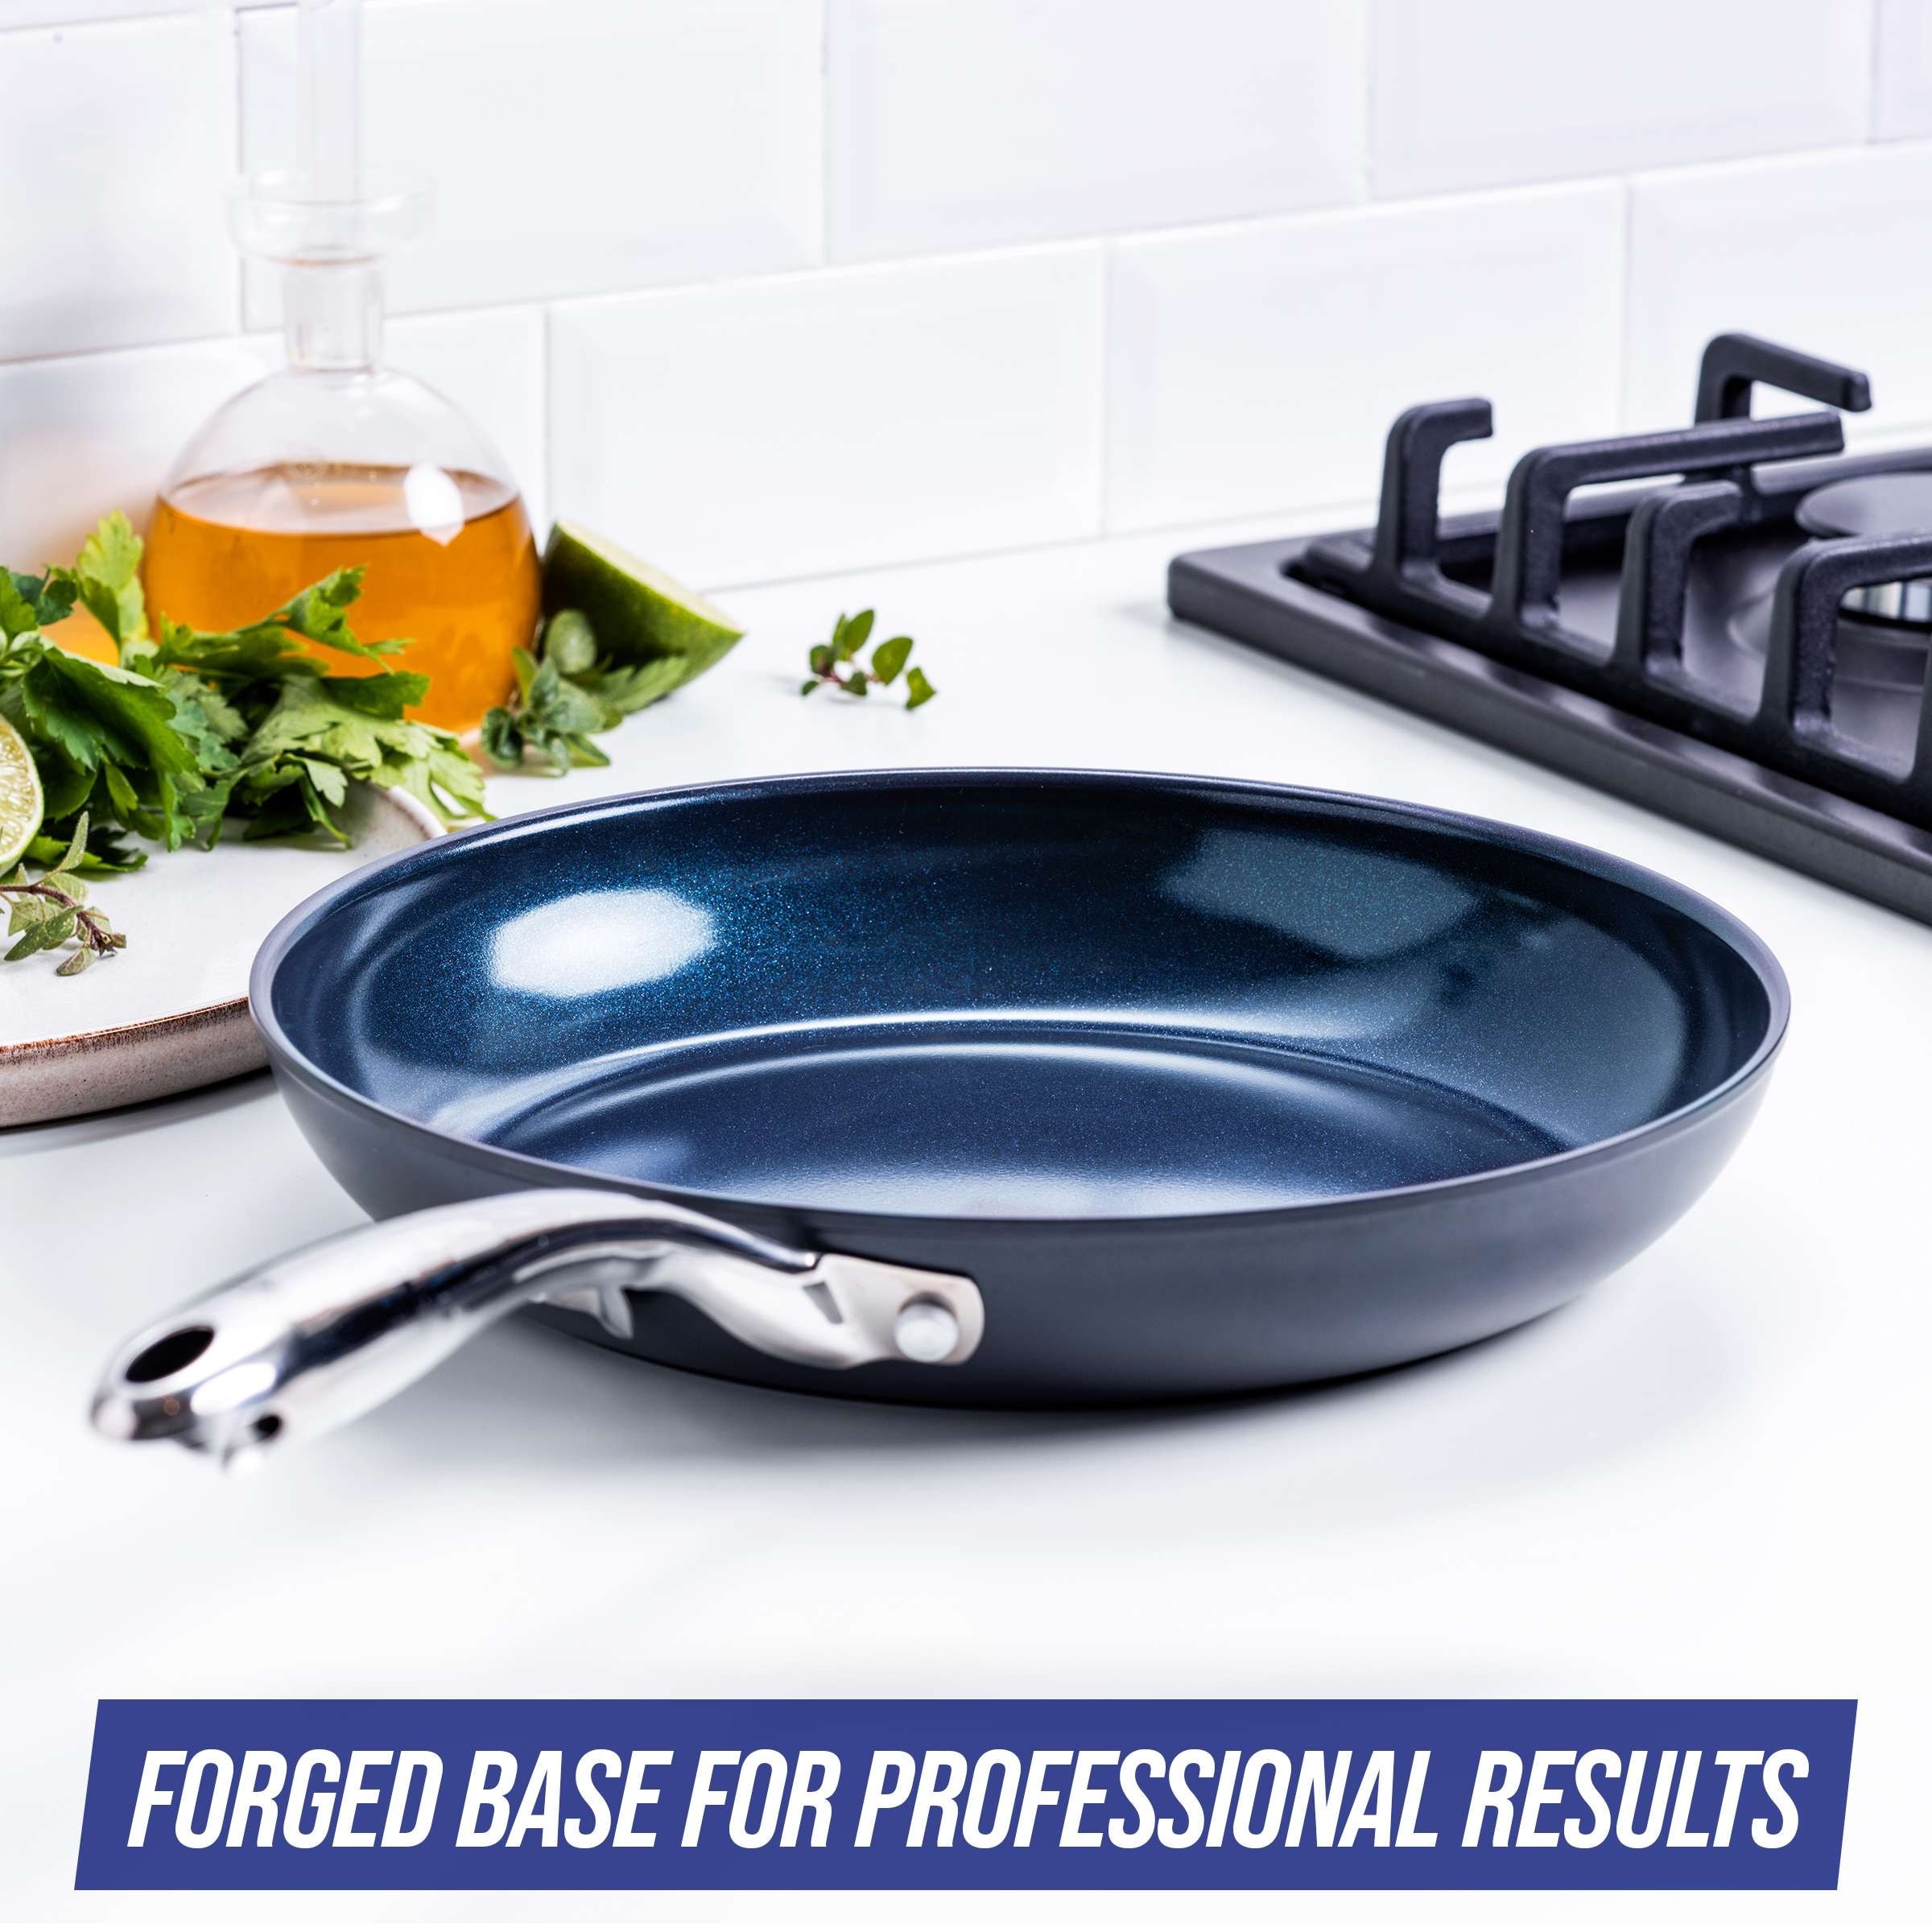 https://ak1.ostkcdn.com/images/products/is/images/direct/c873b8cea5f0b1ce2cd90a2127dea7a988b8a186/Blue-Diamond-Hard-Anodized-Toxin-Free-Ceramic-Nonstick-Dishwasher%2C-Oven%2C-Broiler%2C-Metal-Utensil-Safe-Frying-Pan%2C-10%22.jpg